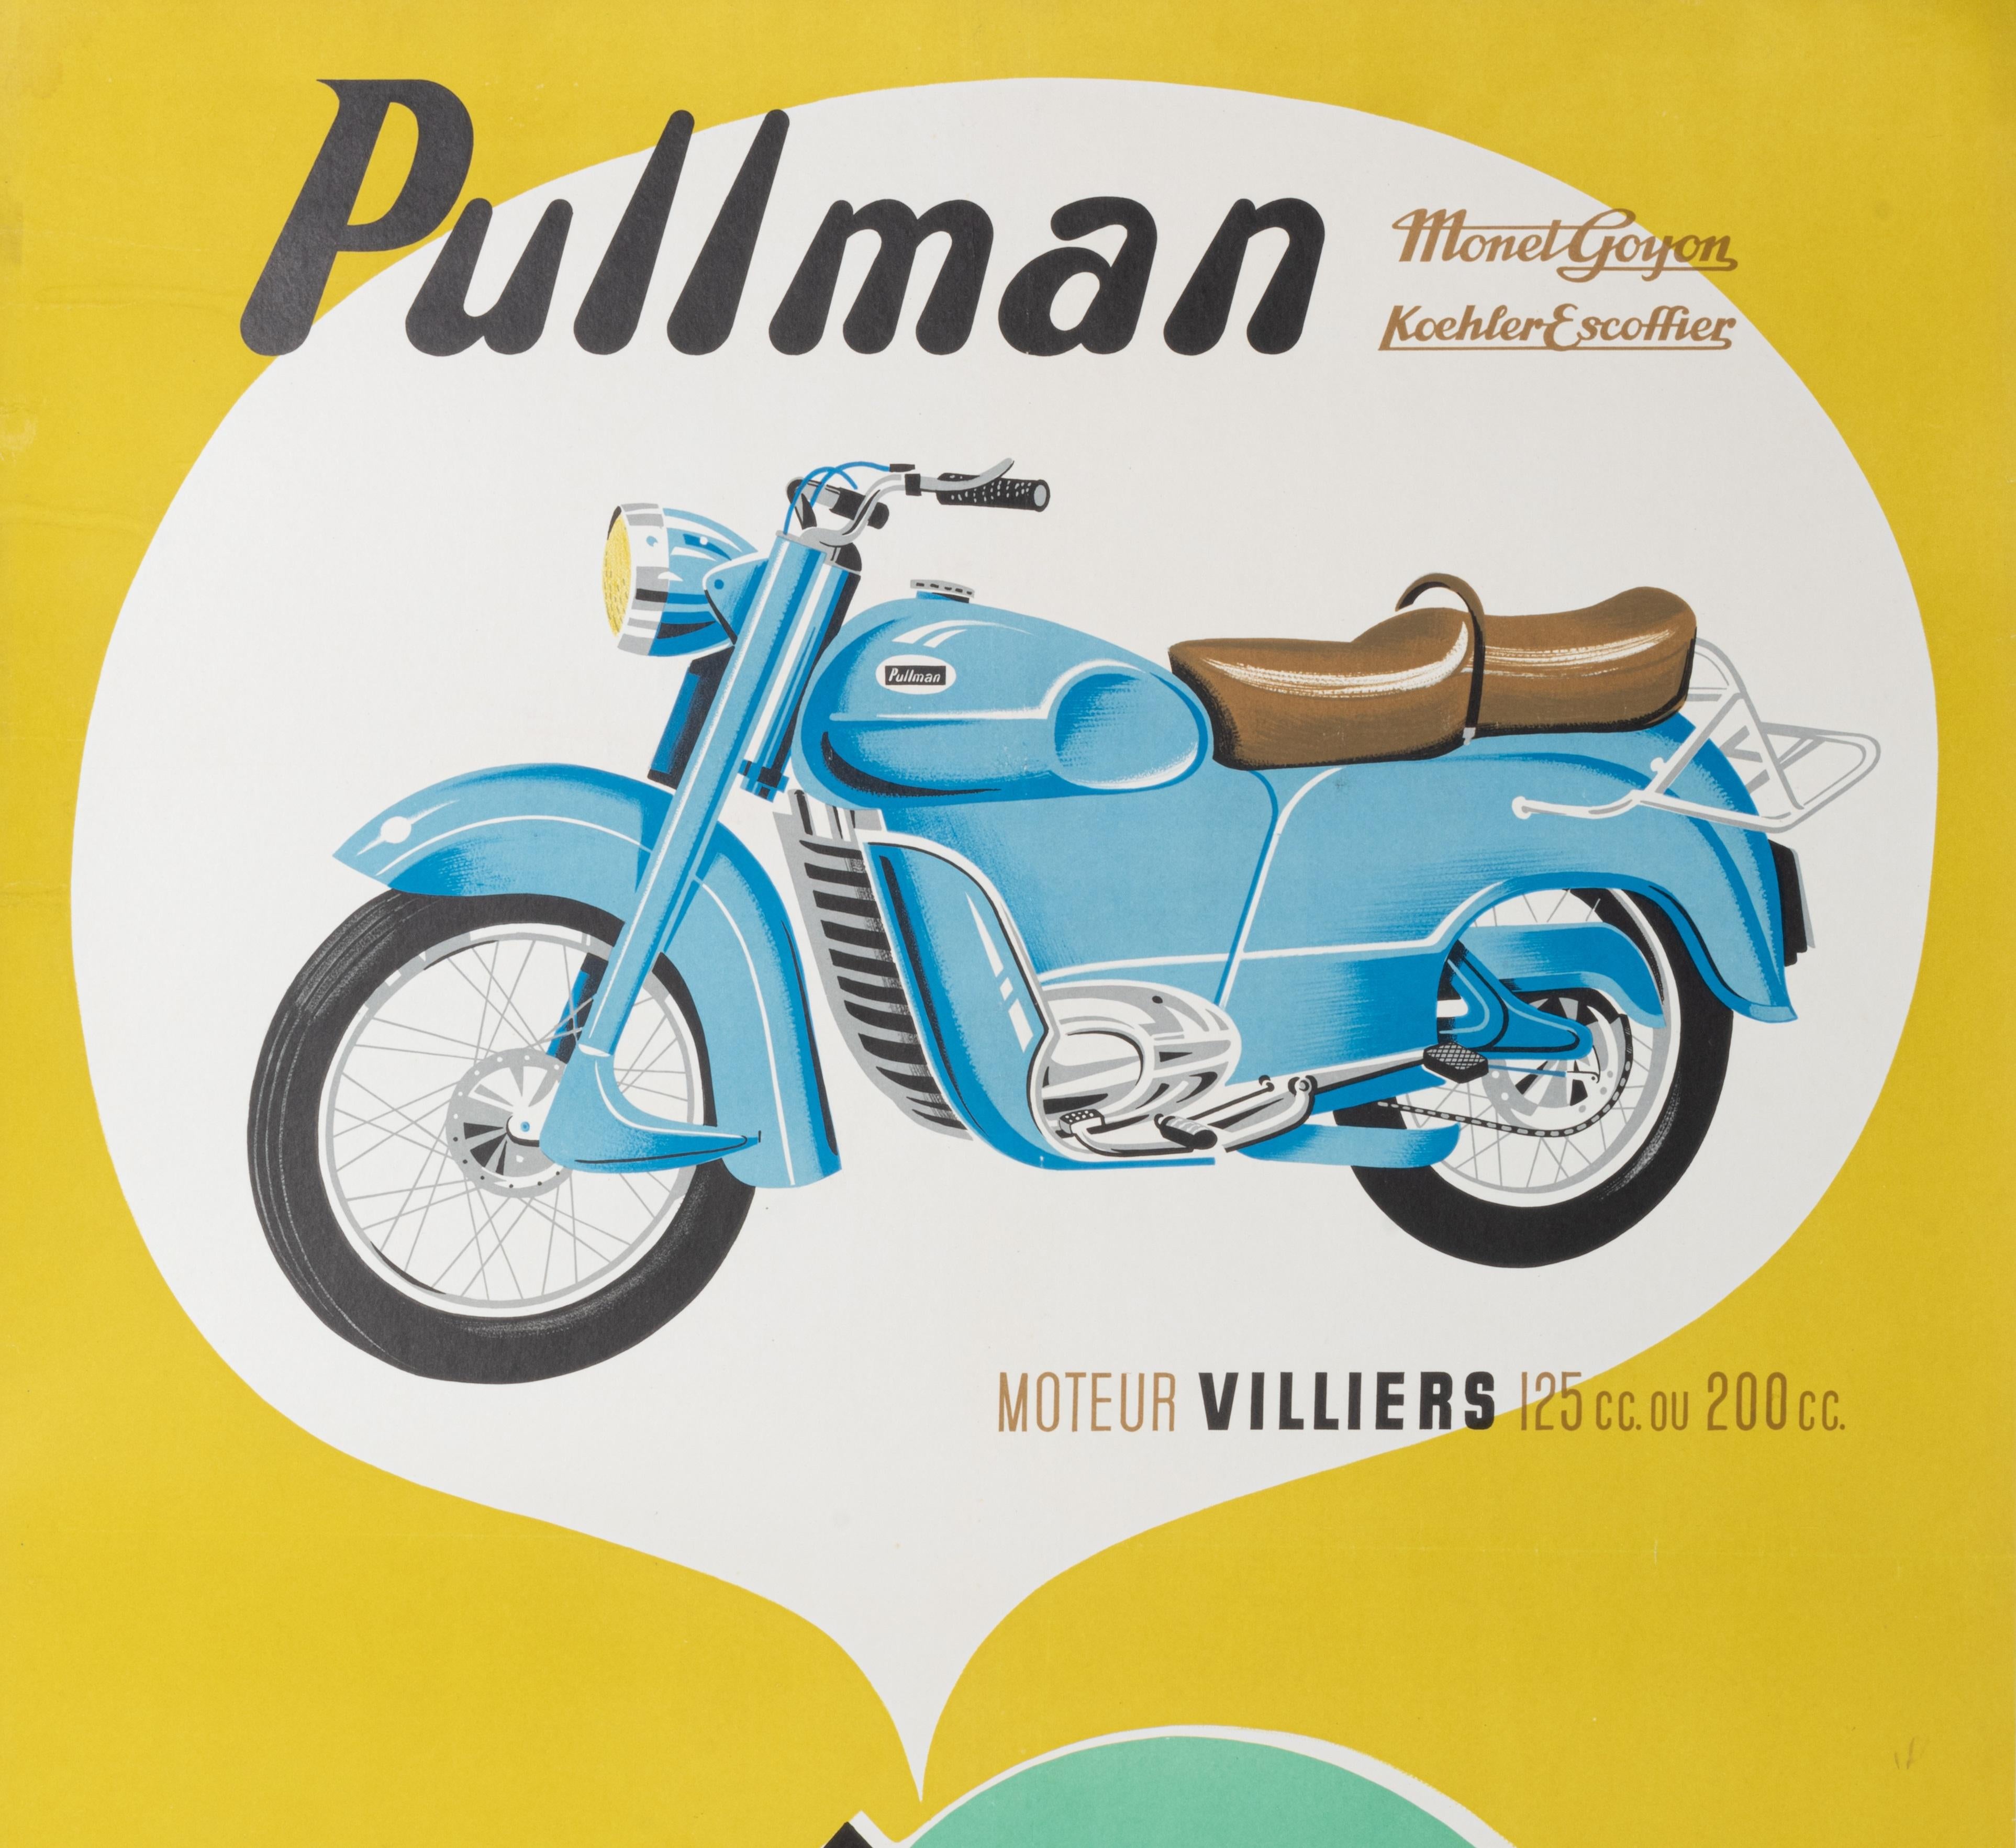 Advertising poster created by Gouju and Almaric for the Pullman motorcycle, created in 1956 by the manufacturer Monet & Goyon / Koehler Escoffier.

Artist: Gouju et Amalric
Title: Moto Pullman - Monet & Goyon / Koehler Escoffier 
Date: 1956
Size (w